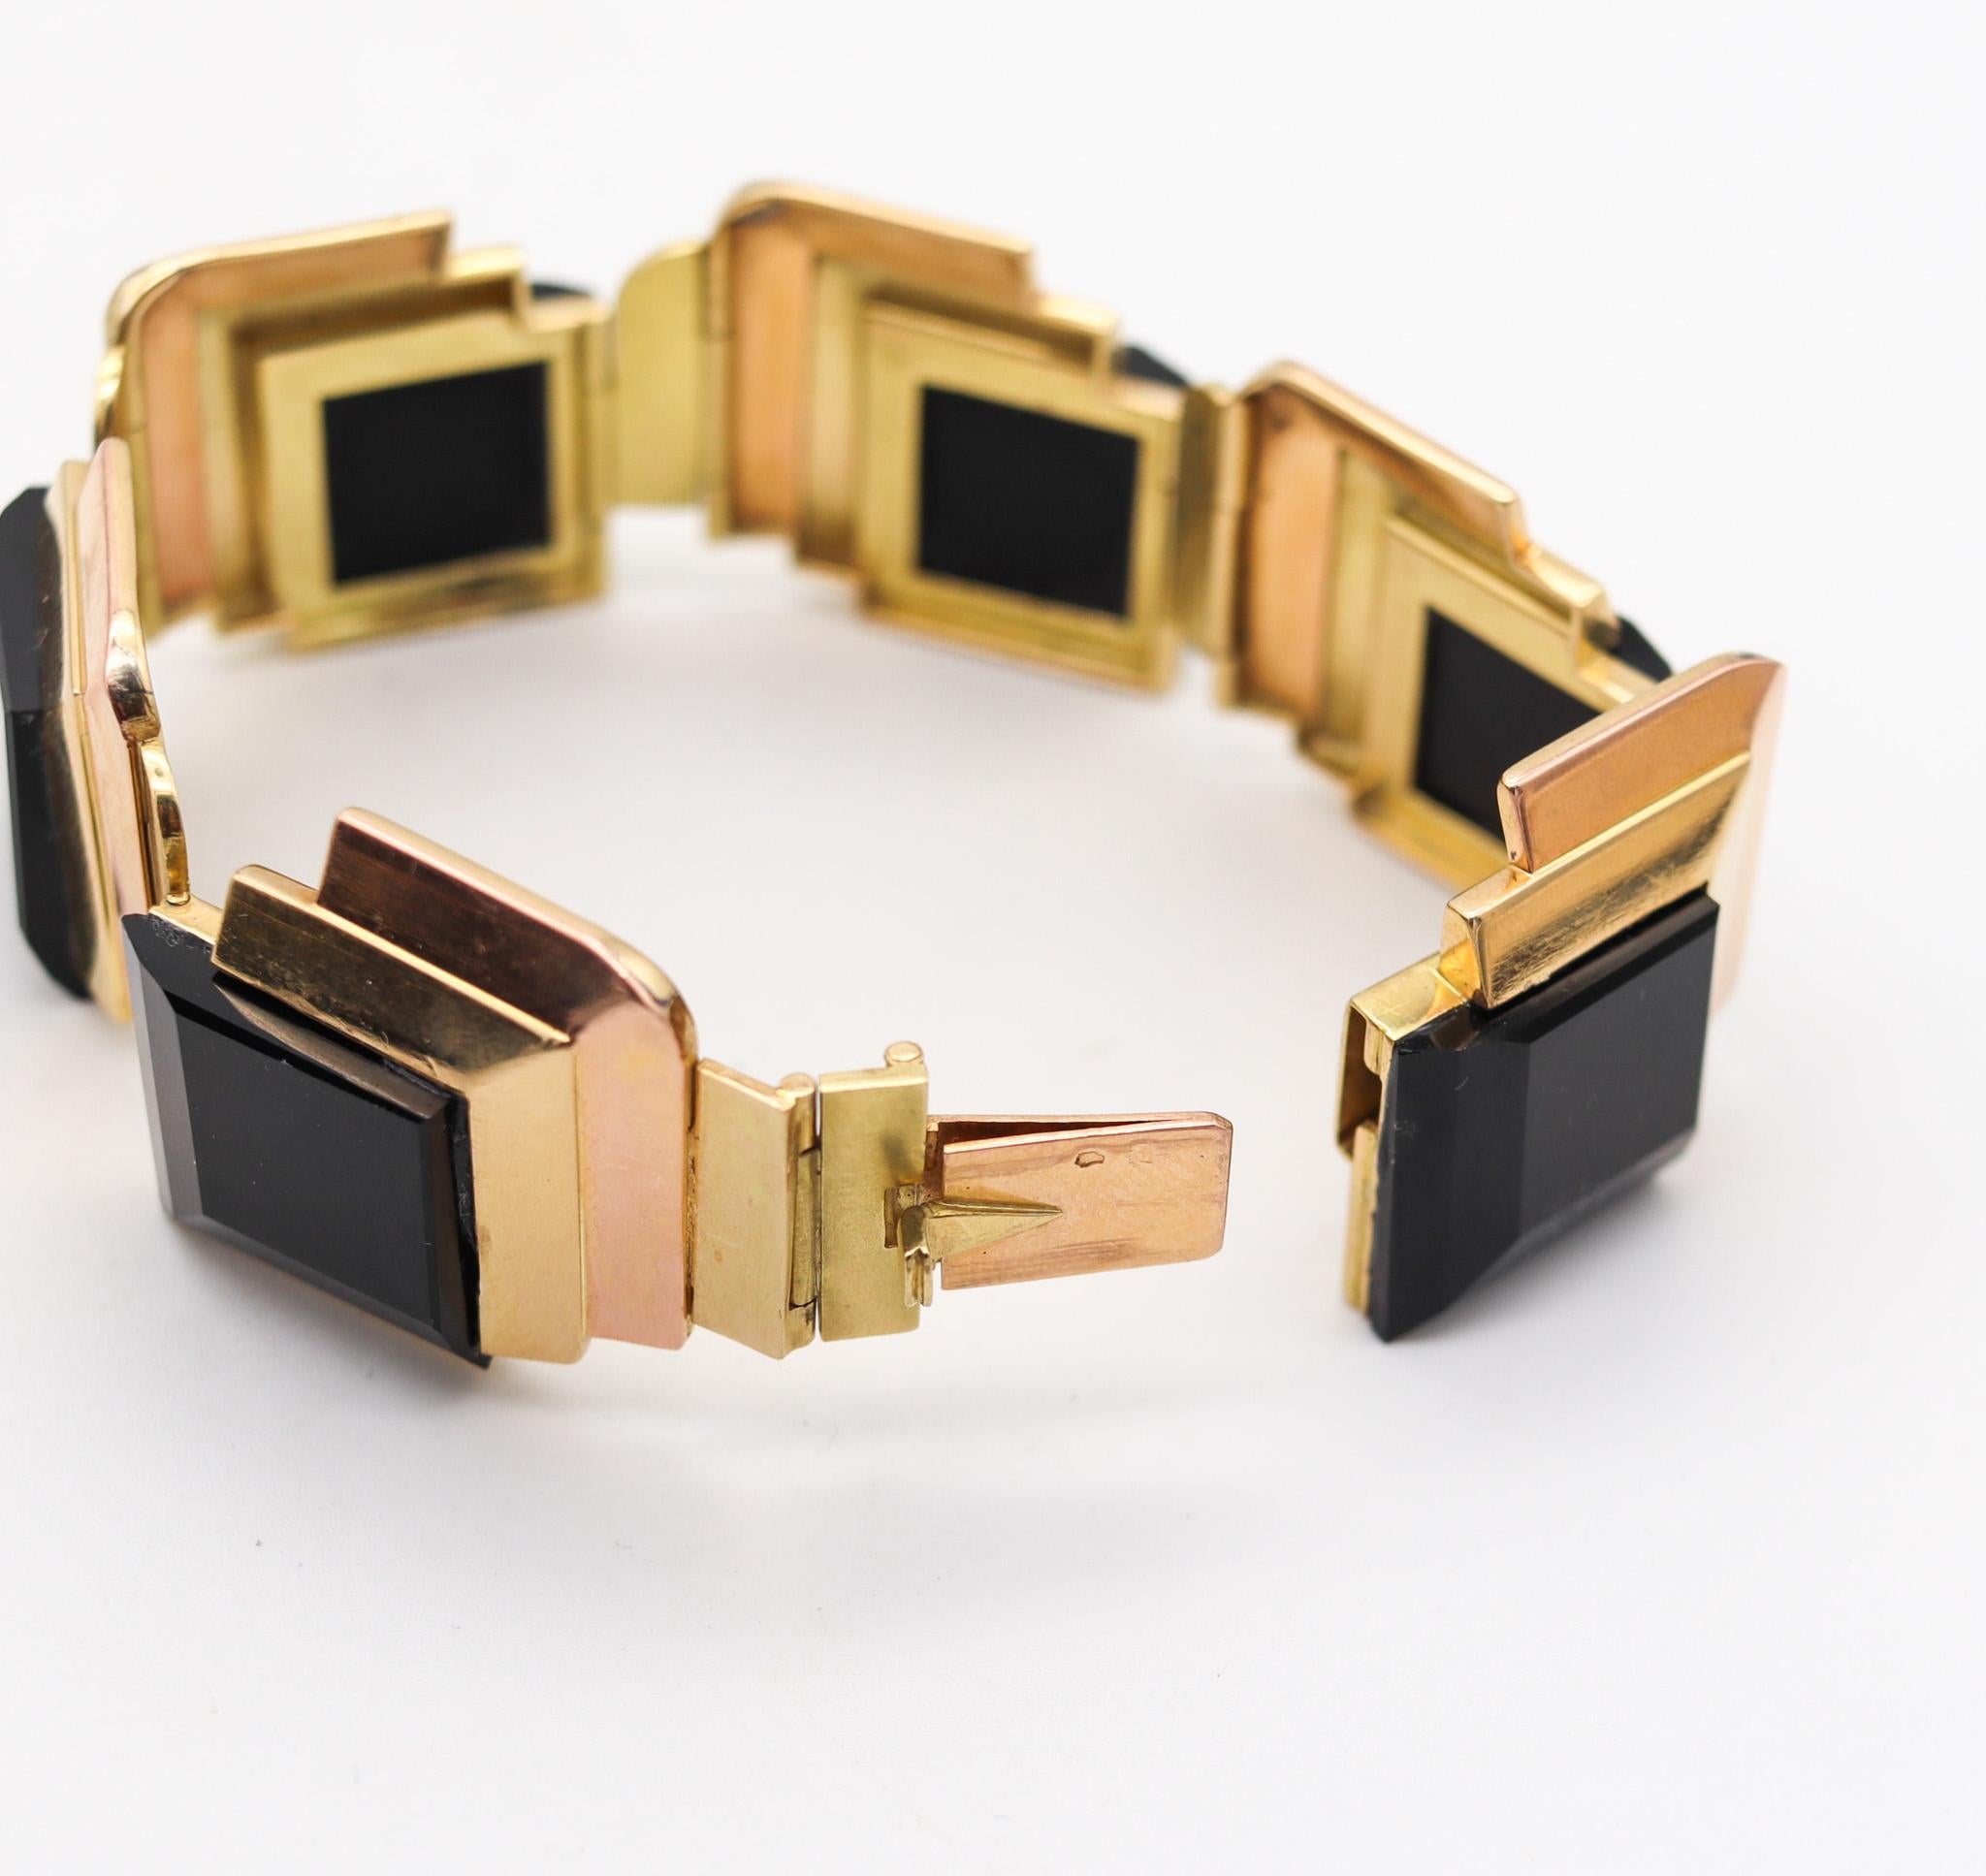 French 1930 Art Deco Geometric Bracelet in 18 Karat Gold with Faceted Onyxes 5